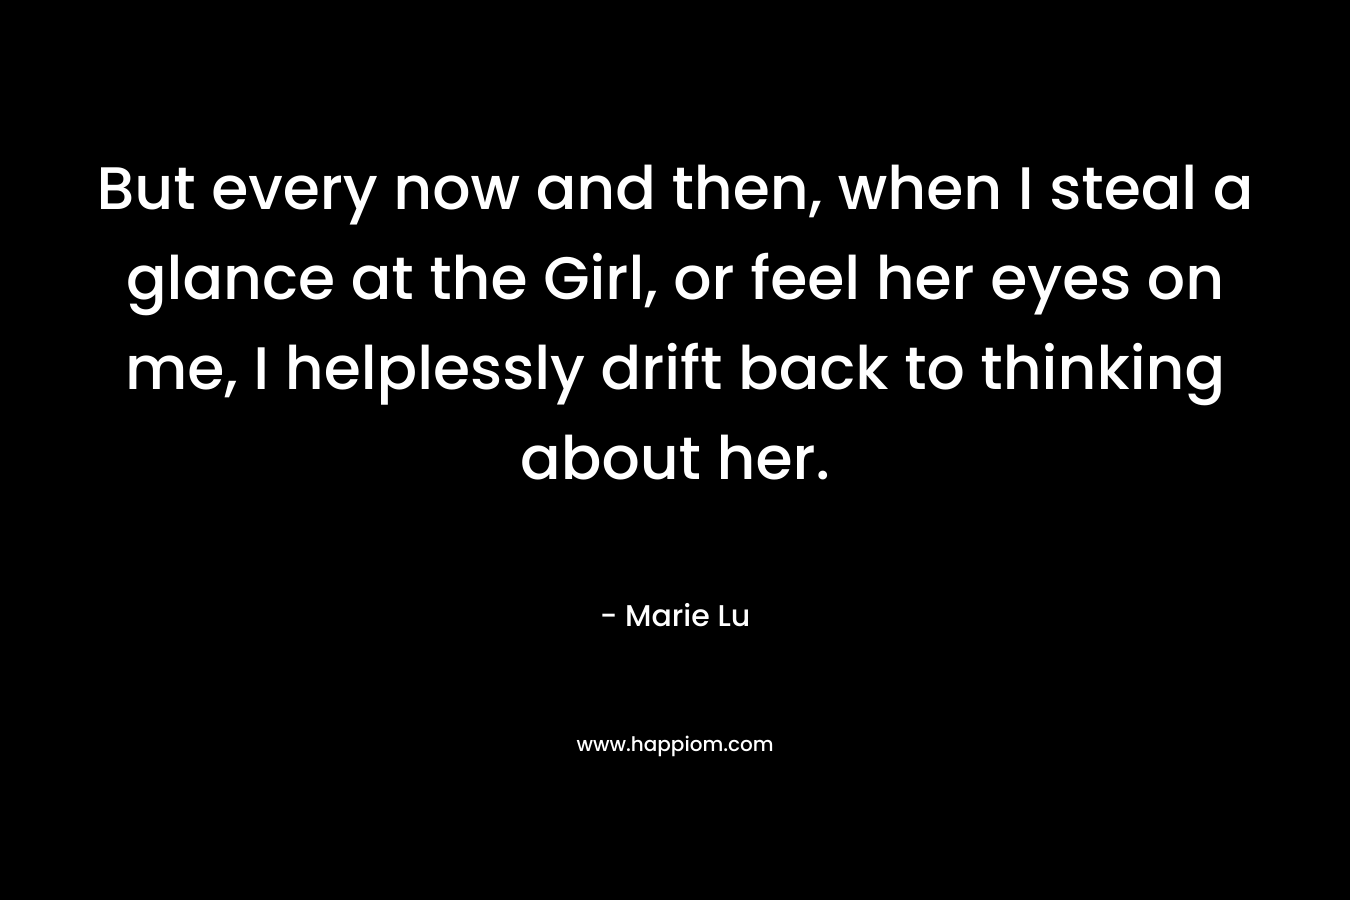 But every now and then, when I steal a glance at the Girl, or feel her eyes on me, I helplessly drift back to thinking about her. – Marie Lu